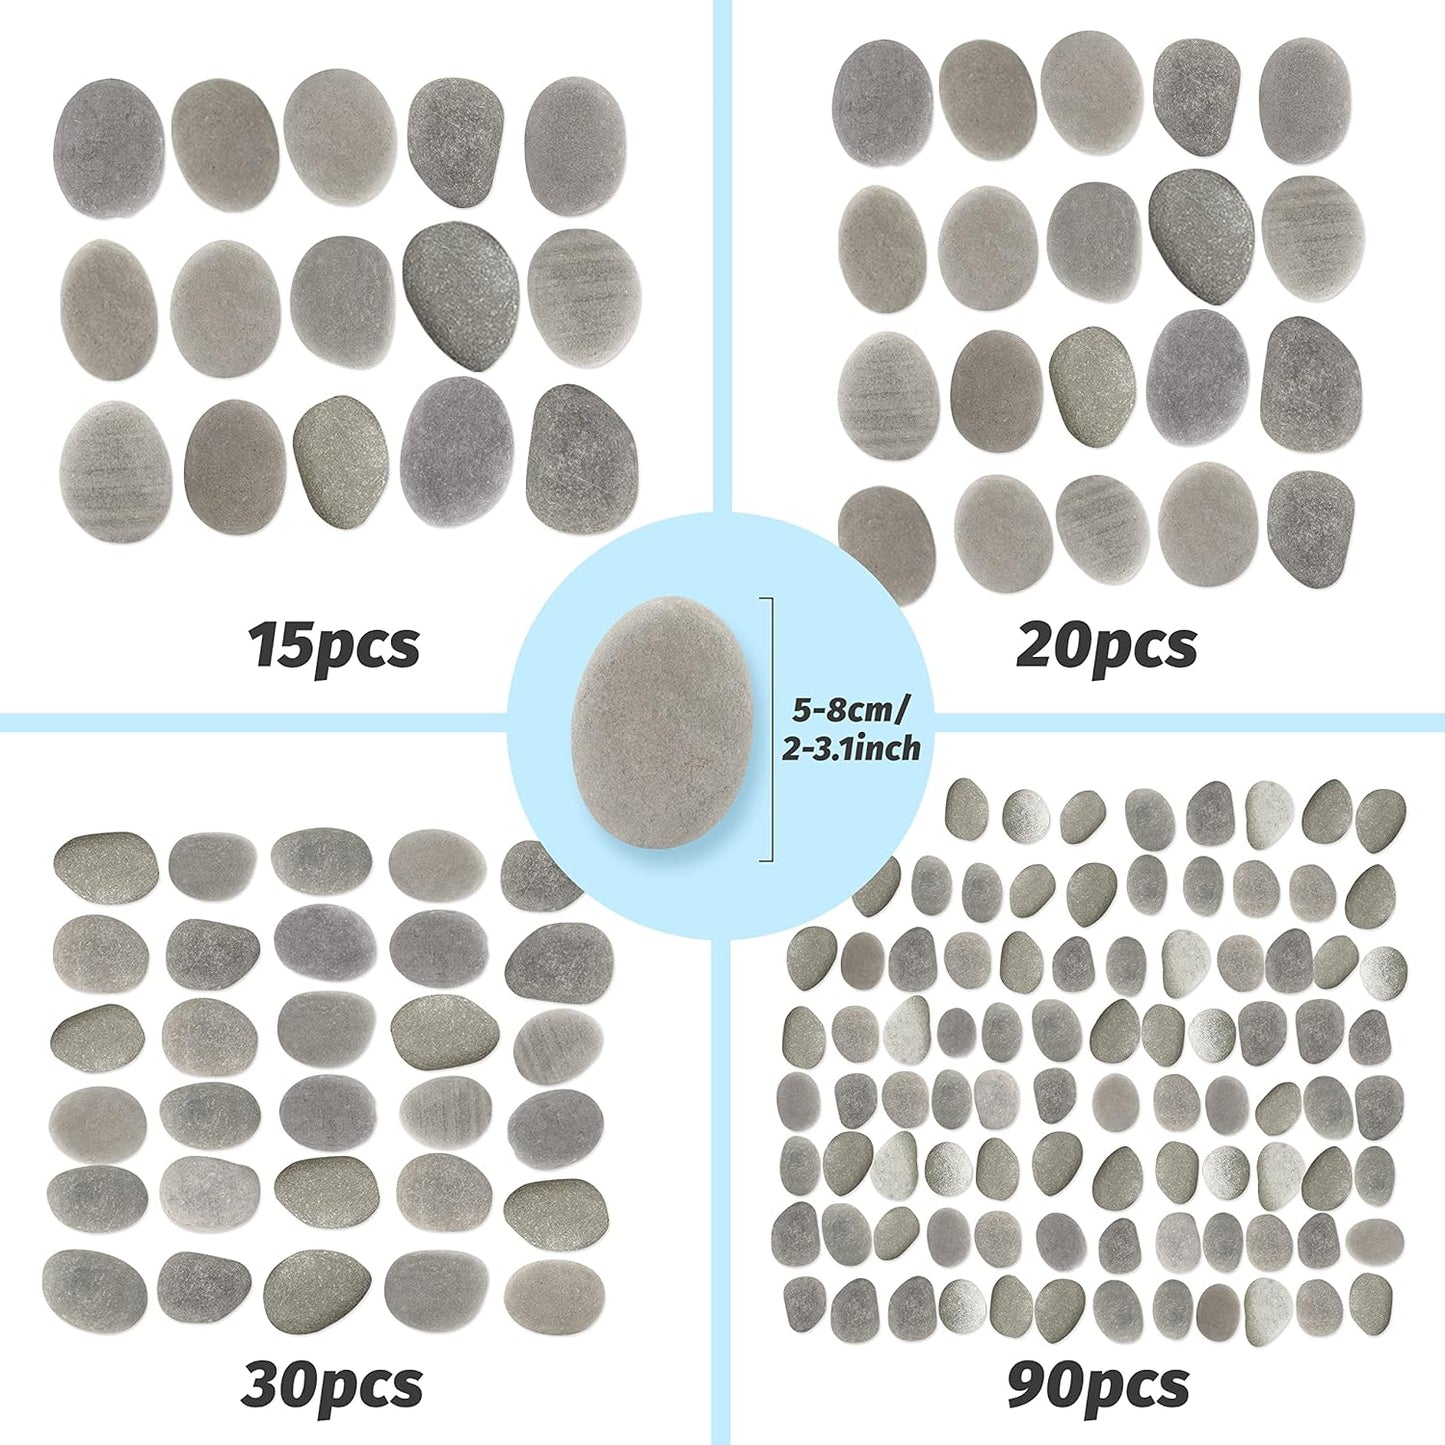 Large Painting Rocks, 30PCS Natural River Rocks, Flat Rocks for Painting, 2-3 Inches Stones for Arts & Crafting